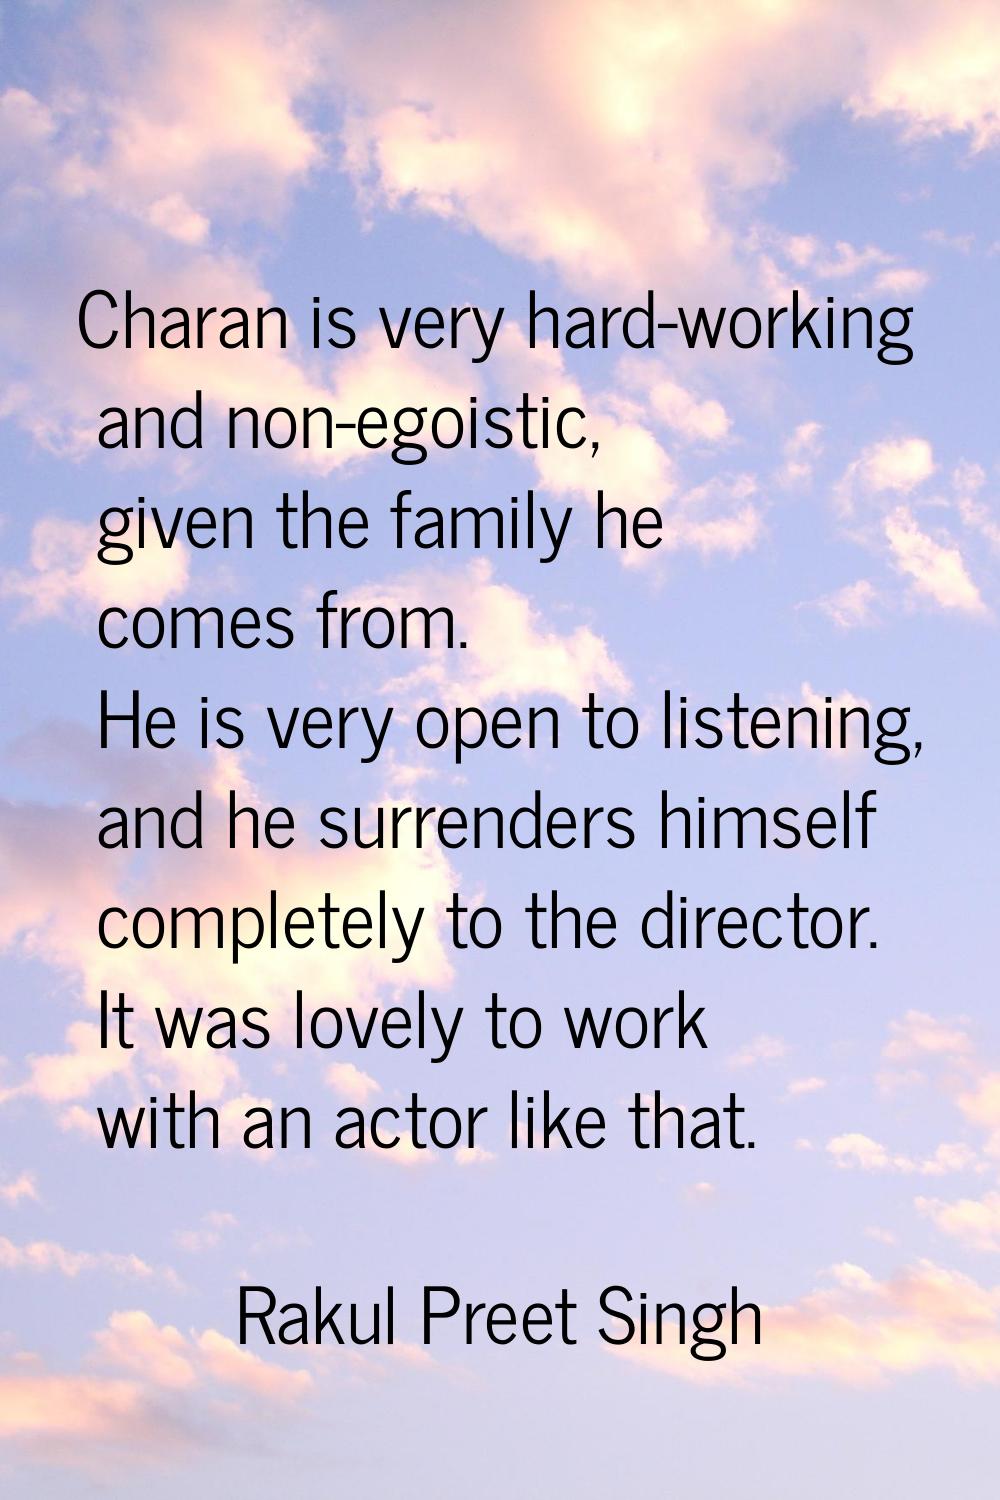 Charan is very hard-working and non-egoistic, given the family he comes from. He is very open to li